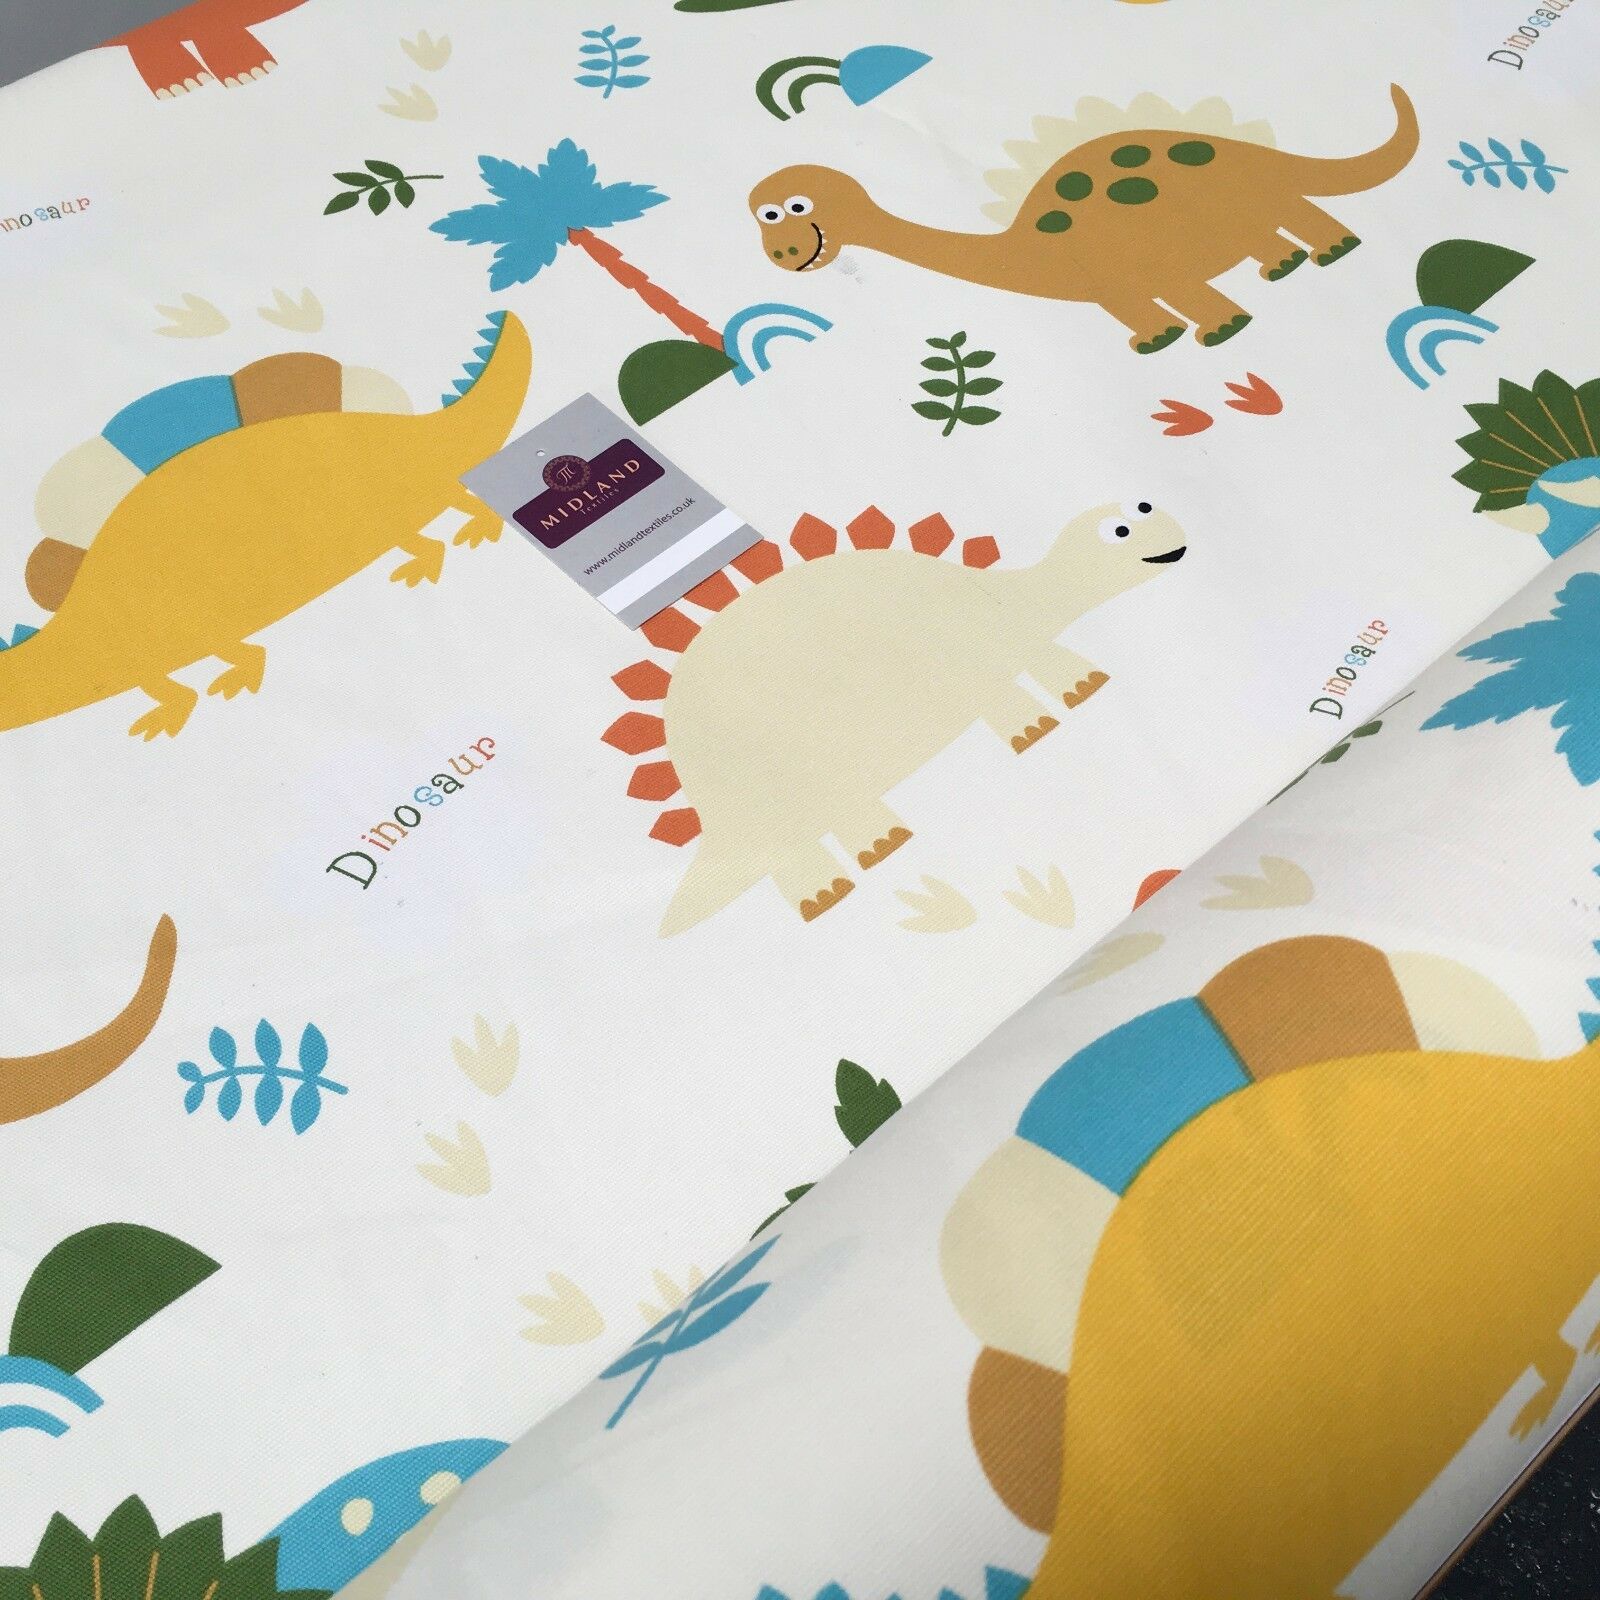 100% Cotton Canvas Novelty Dinosaurs Printed Craft Fabric 58" Wide Mtex MK856